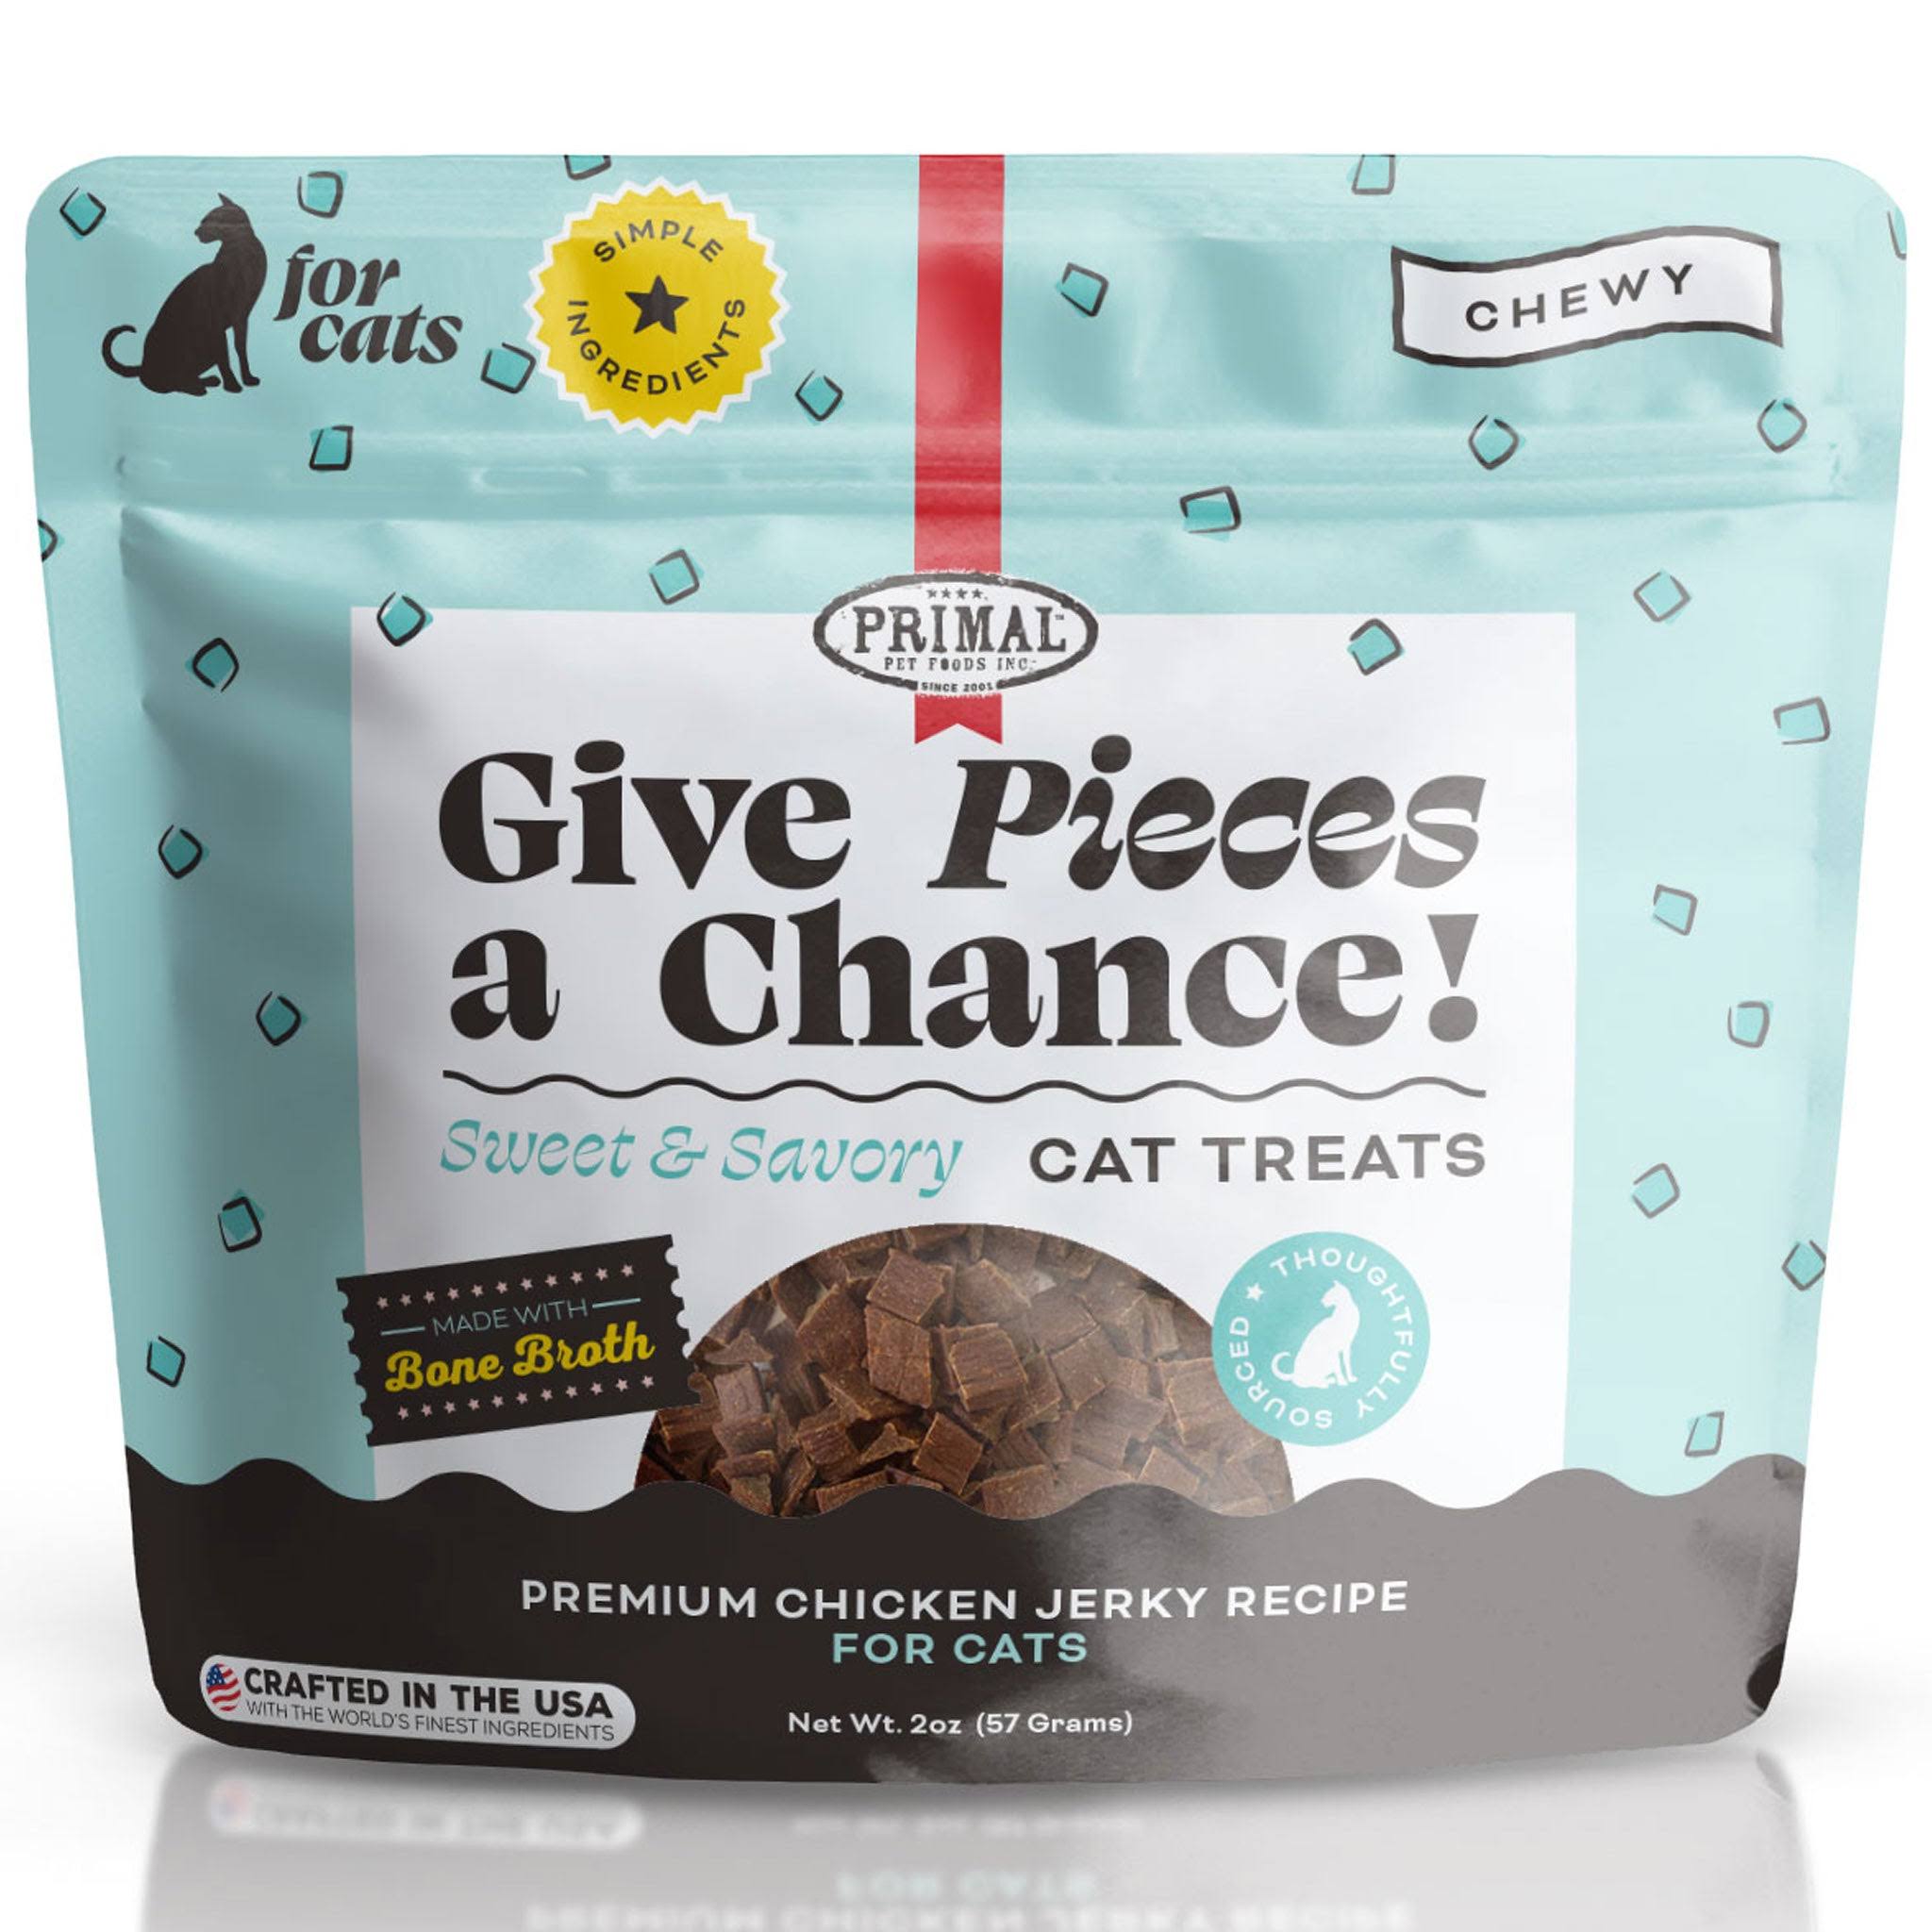 Primal Give Pieces A Chance Chicken Cat Treats - 2 oz | Healthy Cat Treats